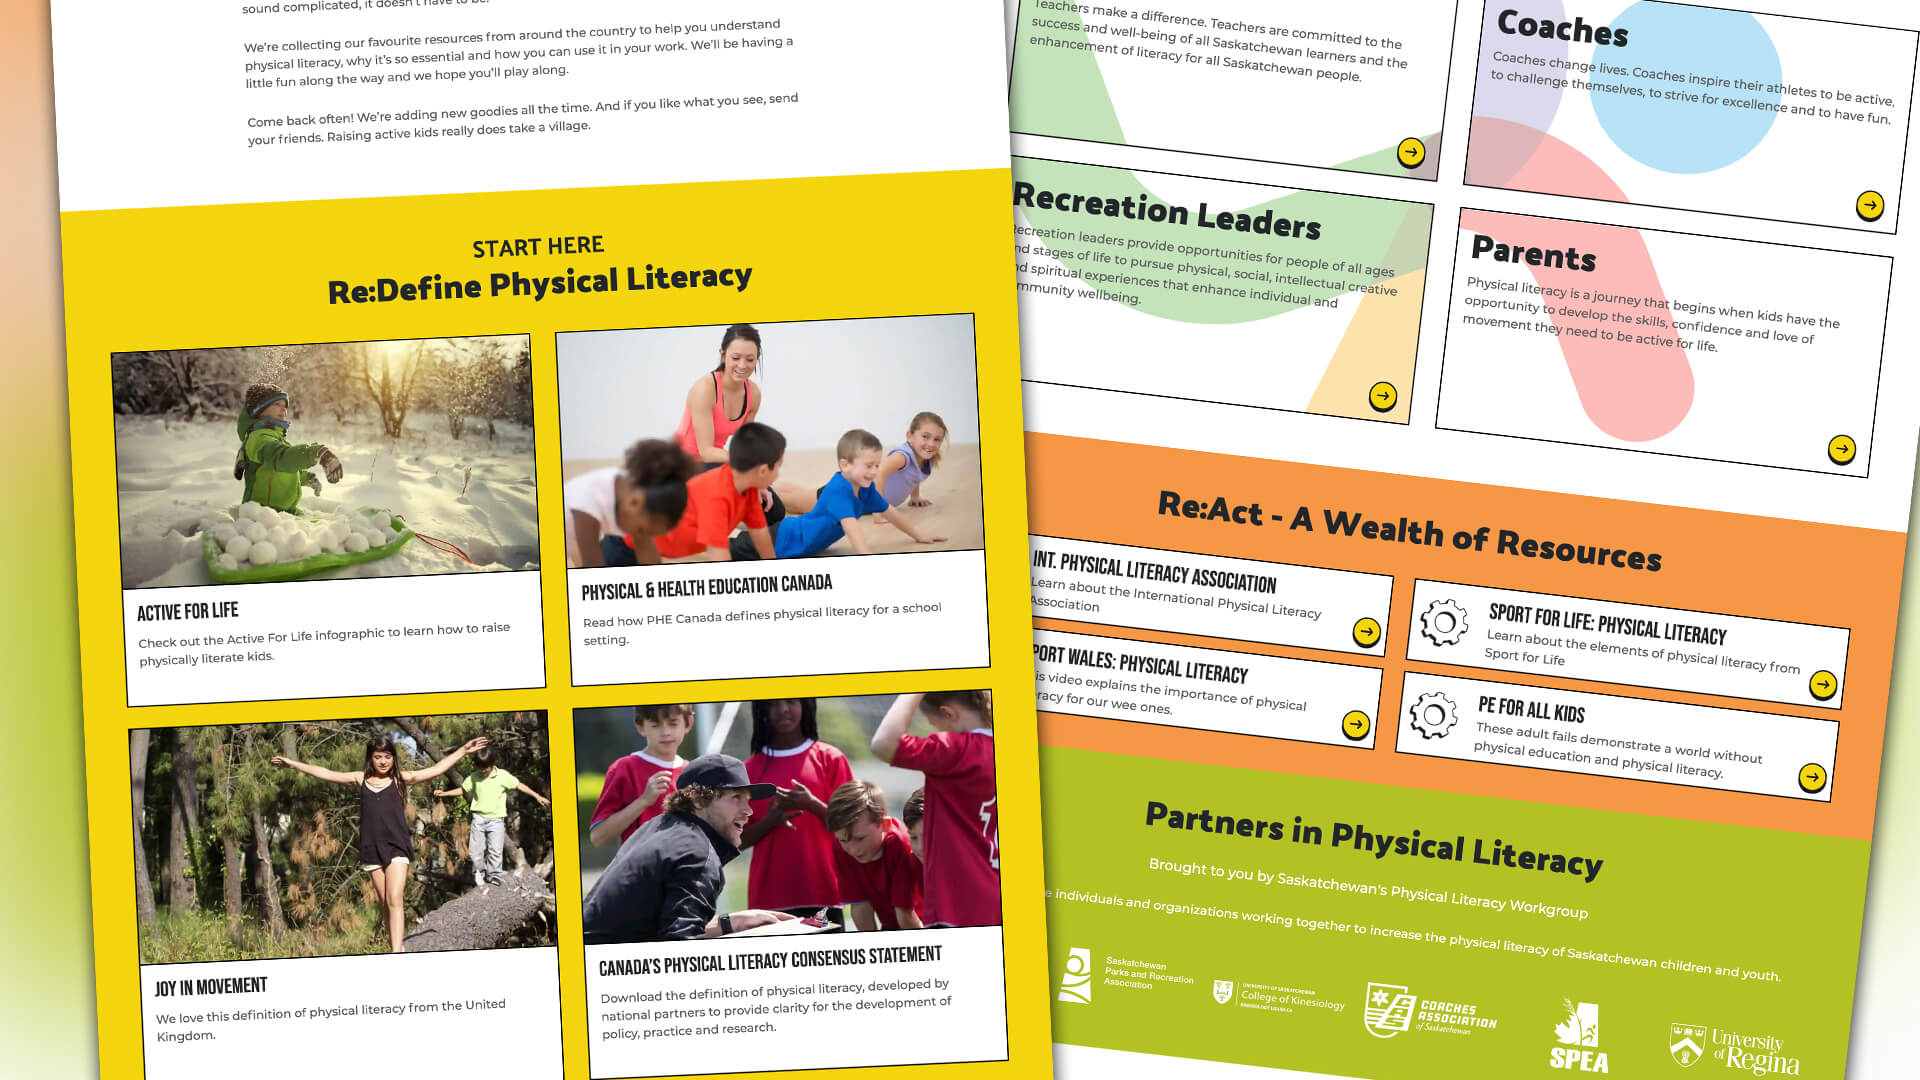 Saskatchewan Physical Literacy Working Group, Website, Sask. Phys Lit Website, Portfolio Image, We all have a role to play: Coaches, Educators, Rec Leaders, Parents.